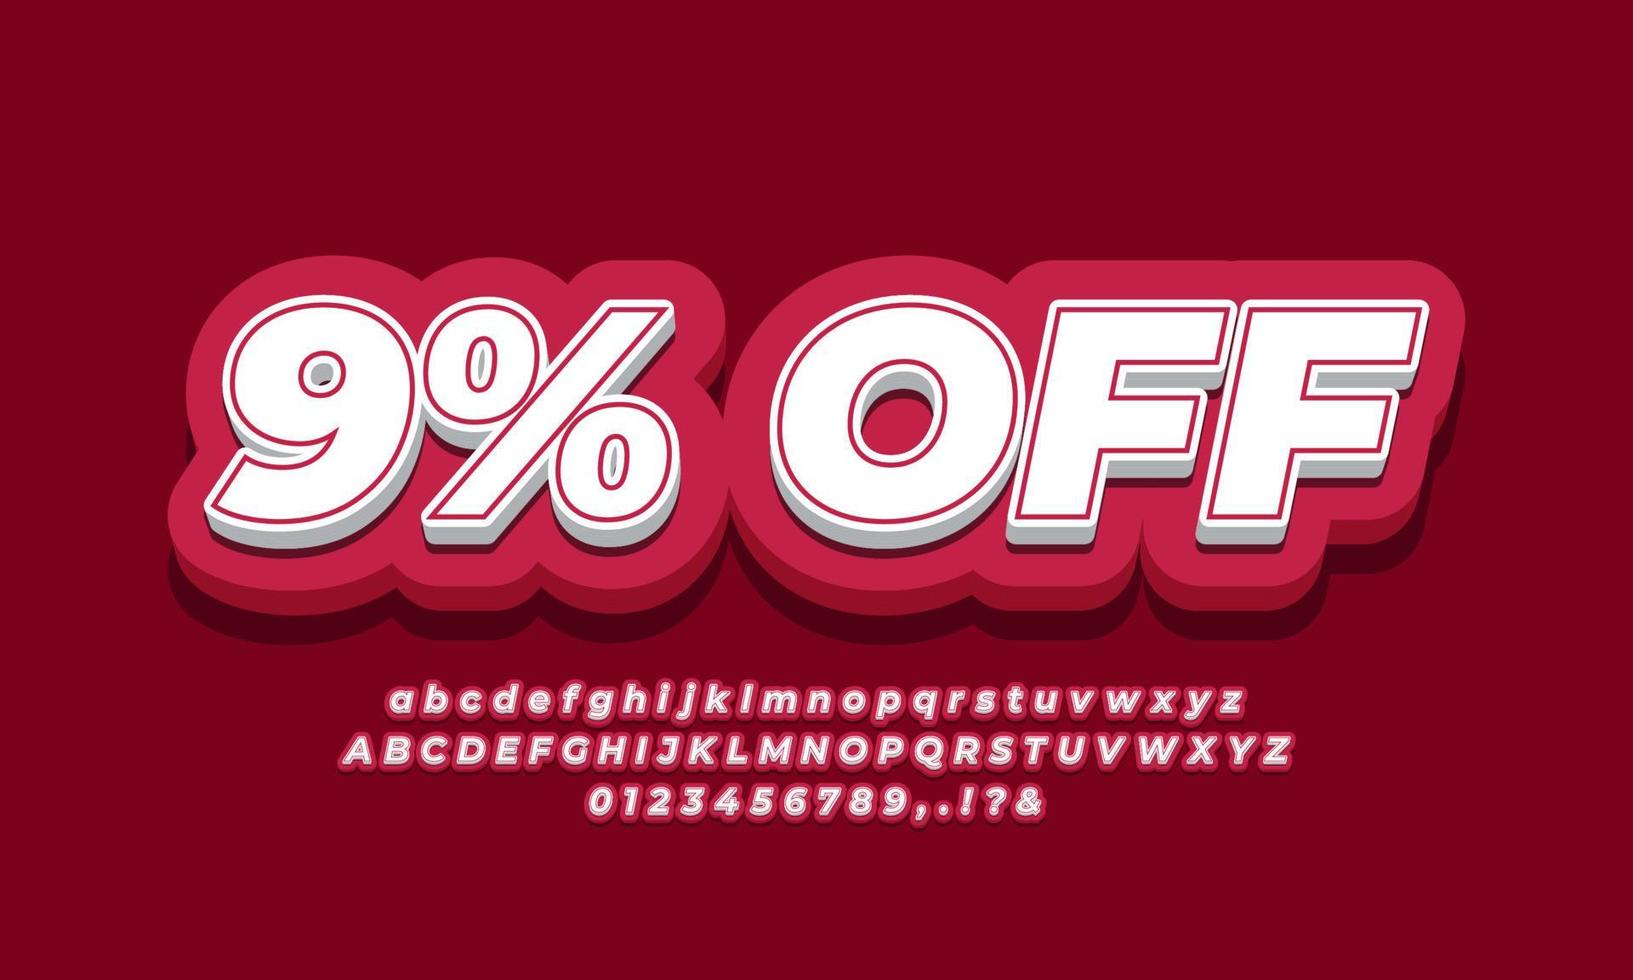 9 percent off sale discount promotion text 3d red vector